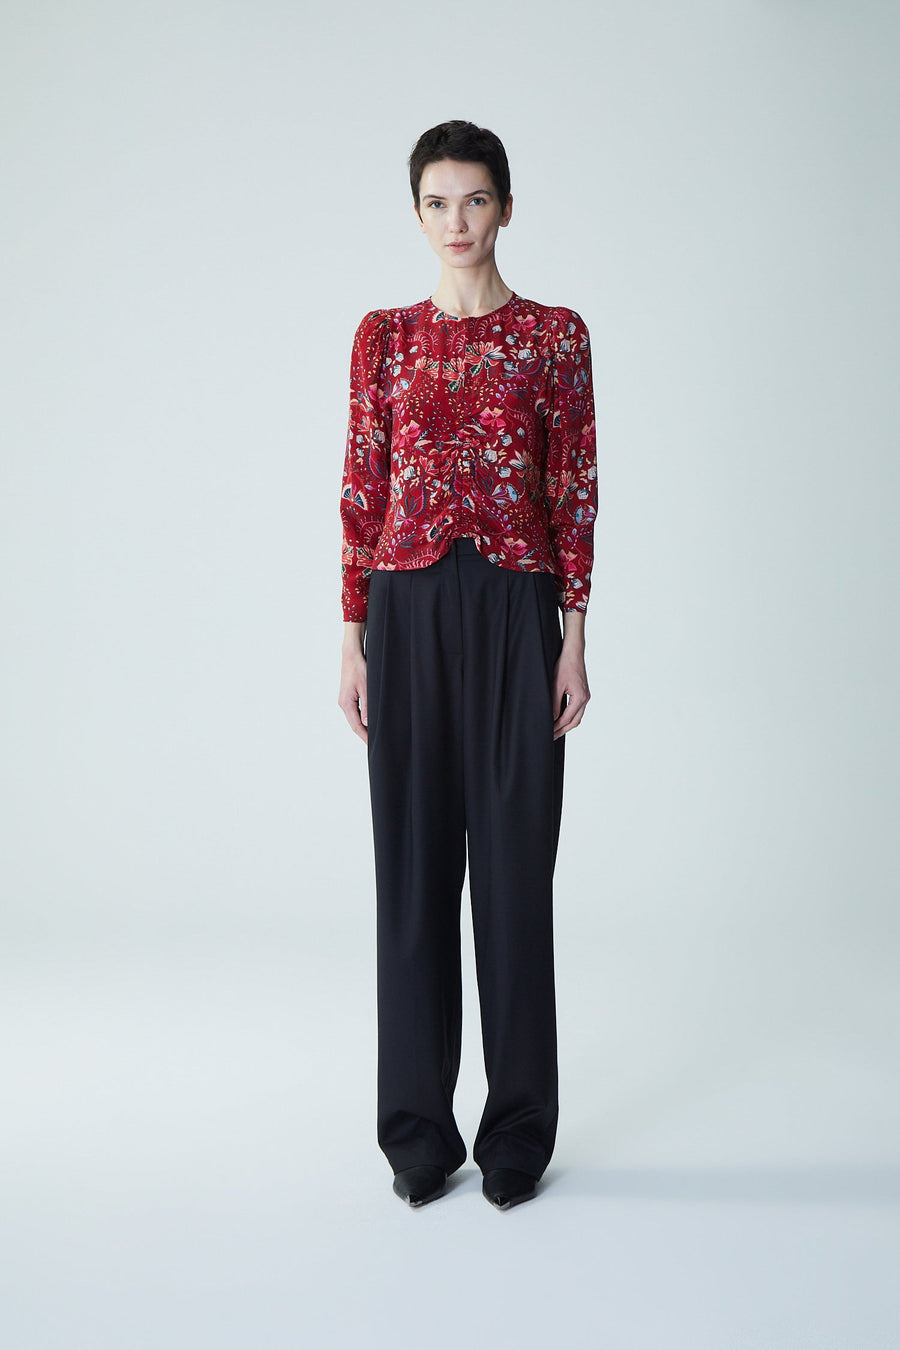 Blouse Palermo Paul Palermo Paula To Red-Berrie